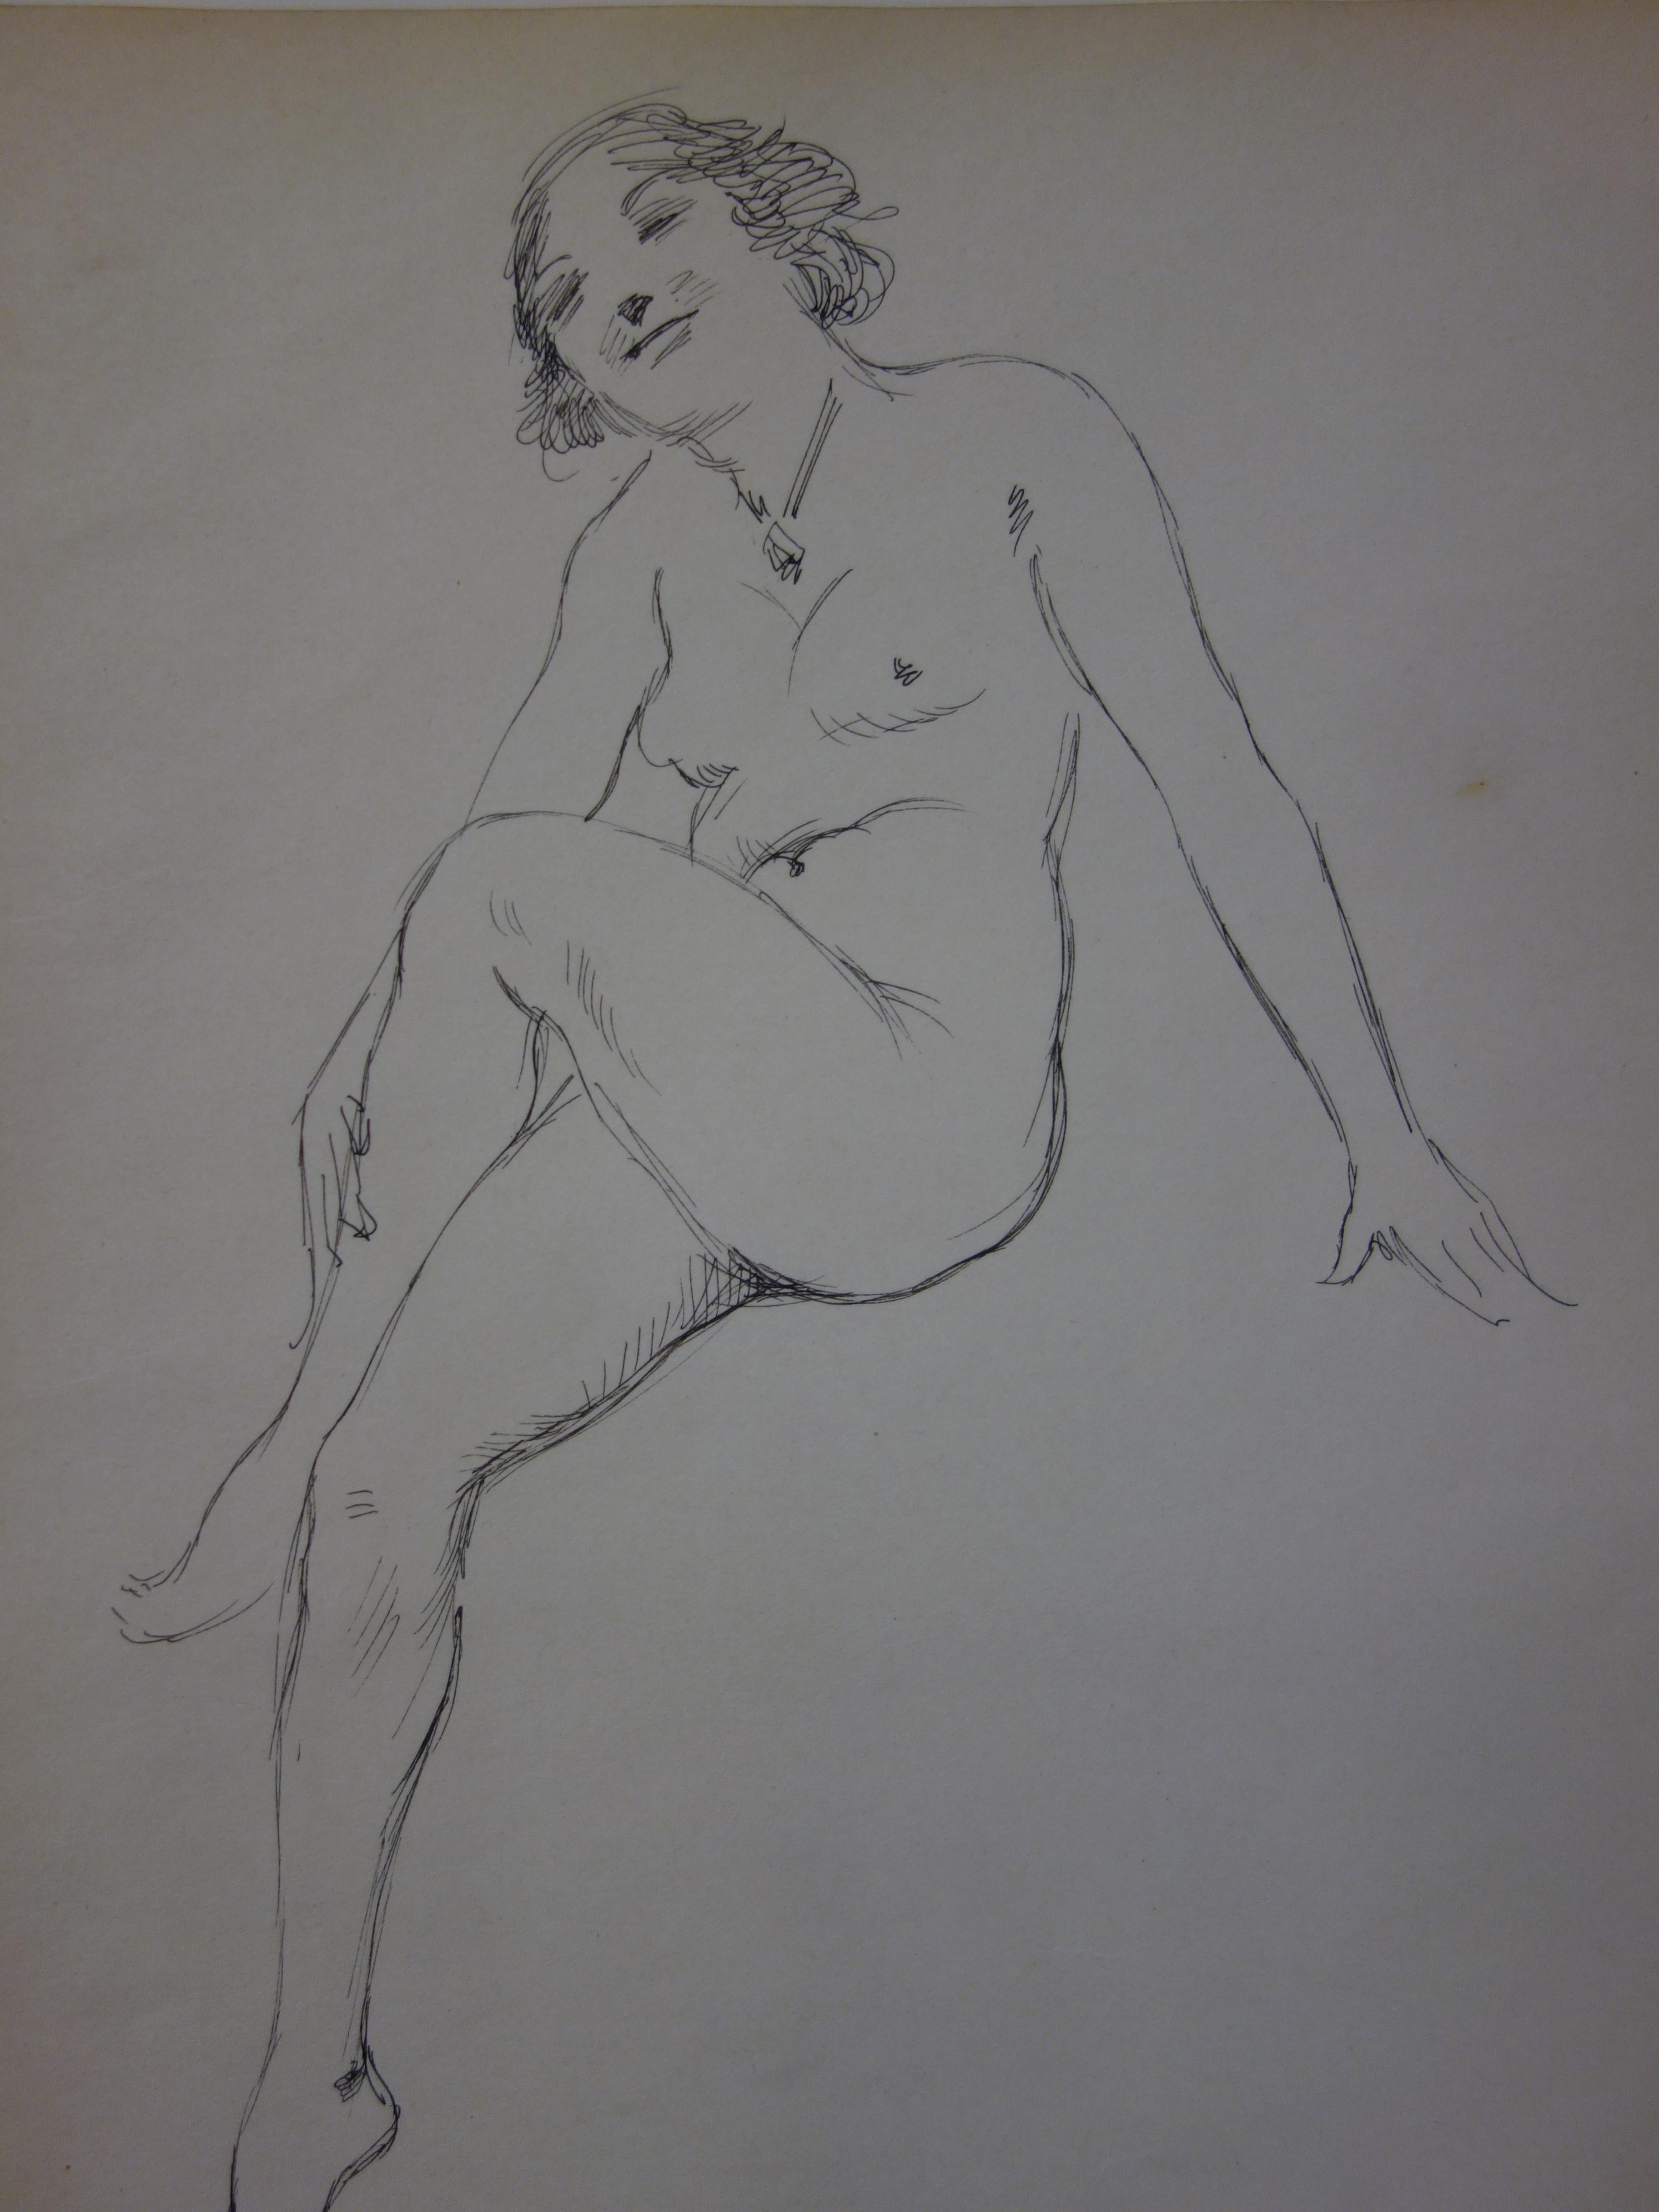 Morning moments - Pencil drawing - circa 1914 - Academic Art by Georges Conrad